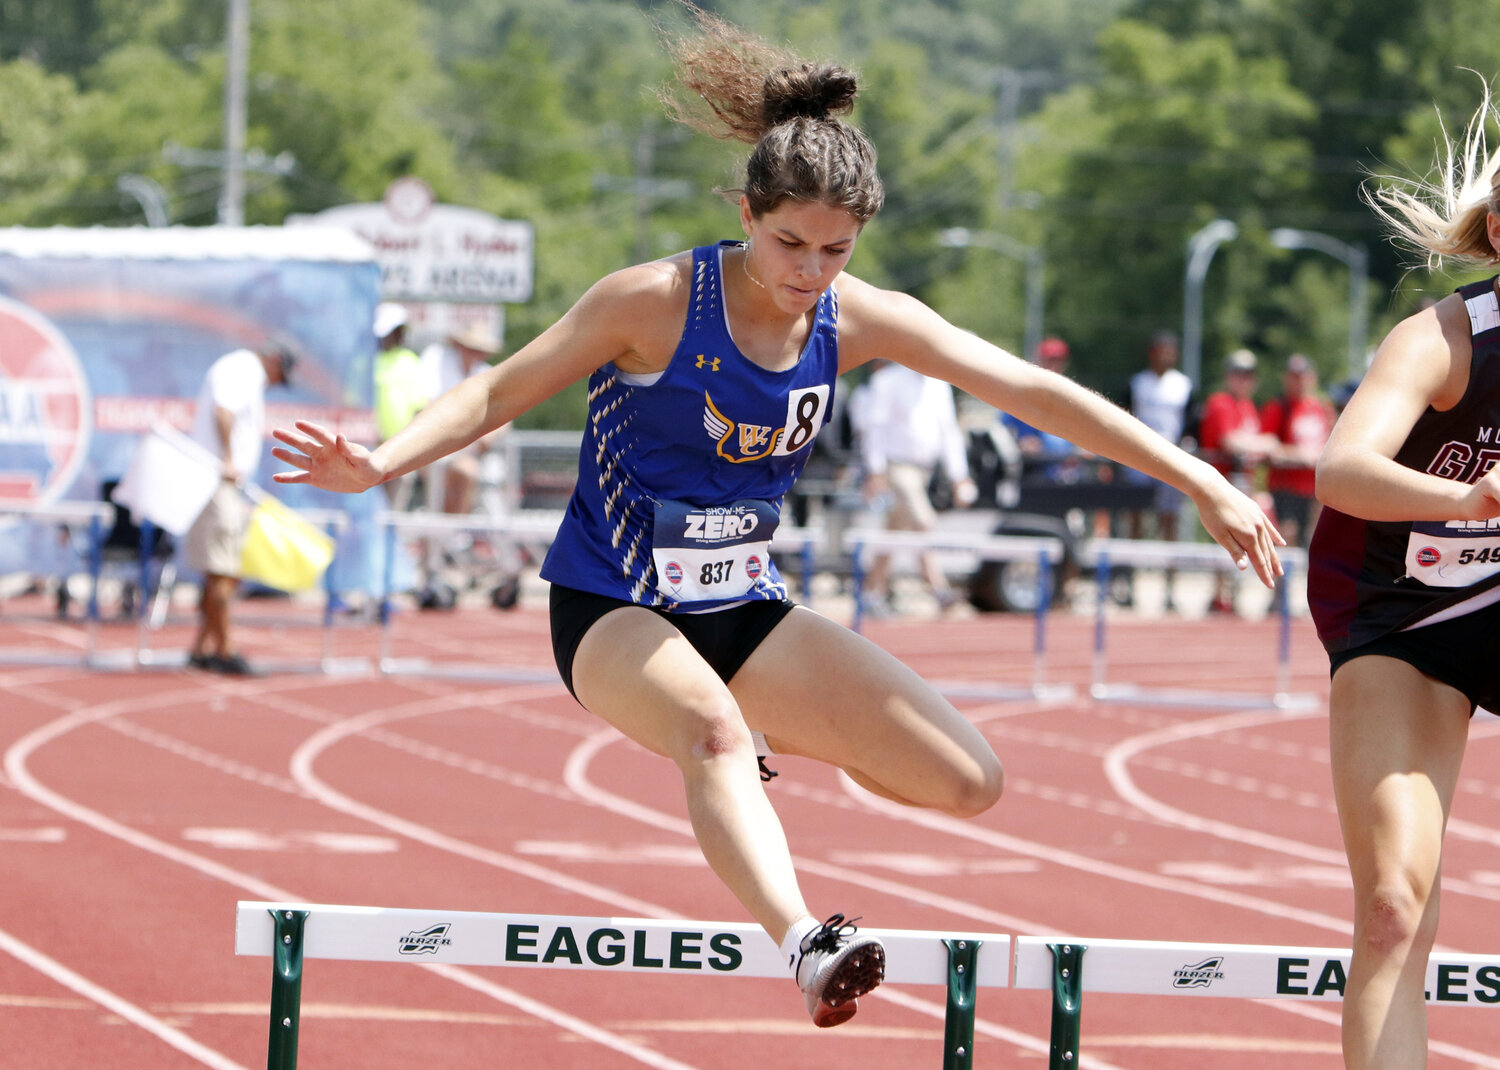 Wright City junior Elizabeth Riggs clears a hurdle during the Class 3 300-meter hurdle finals. Riggs finished the race in sixth place.